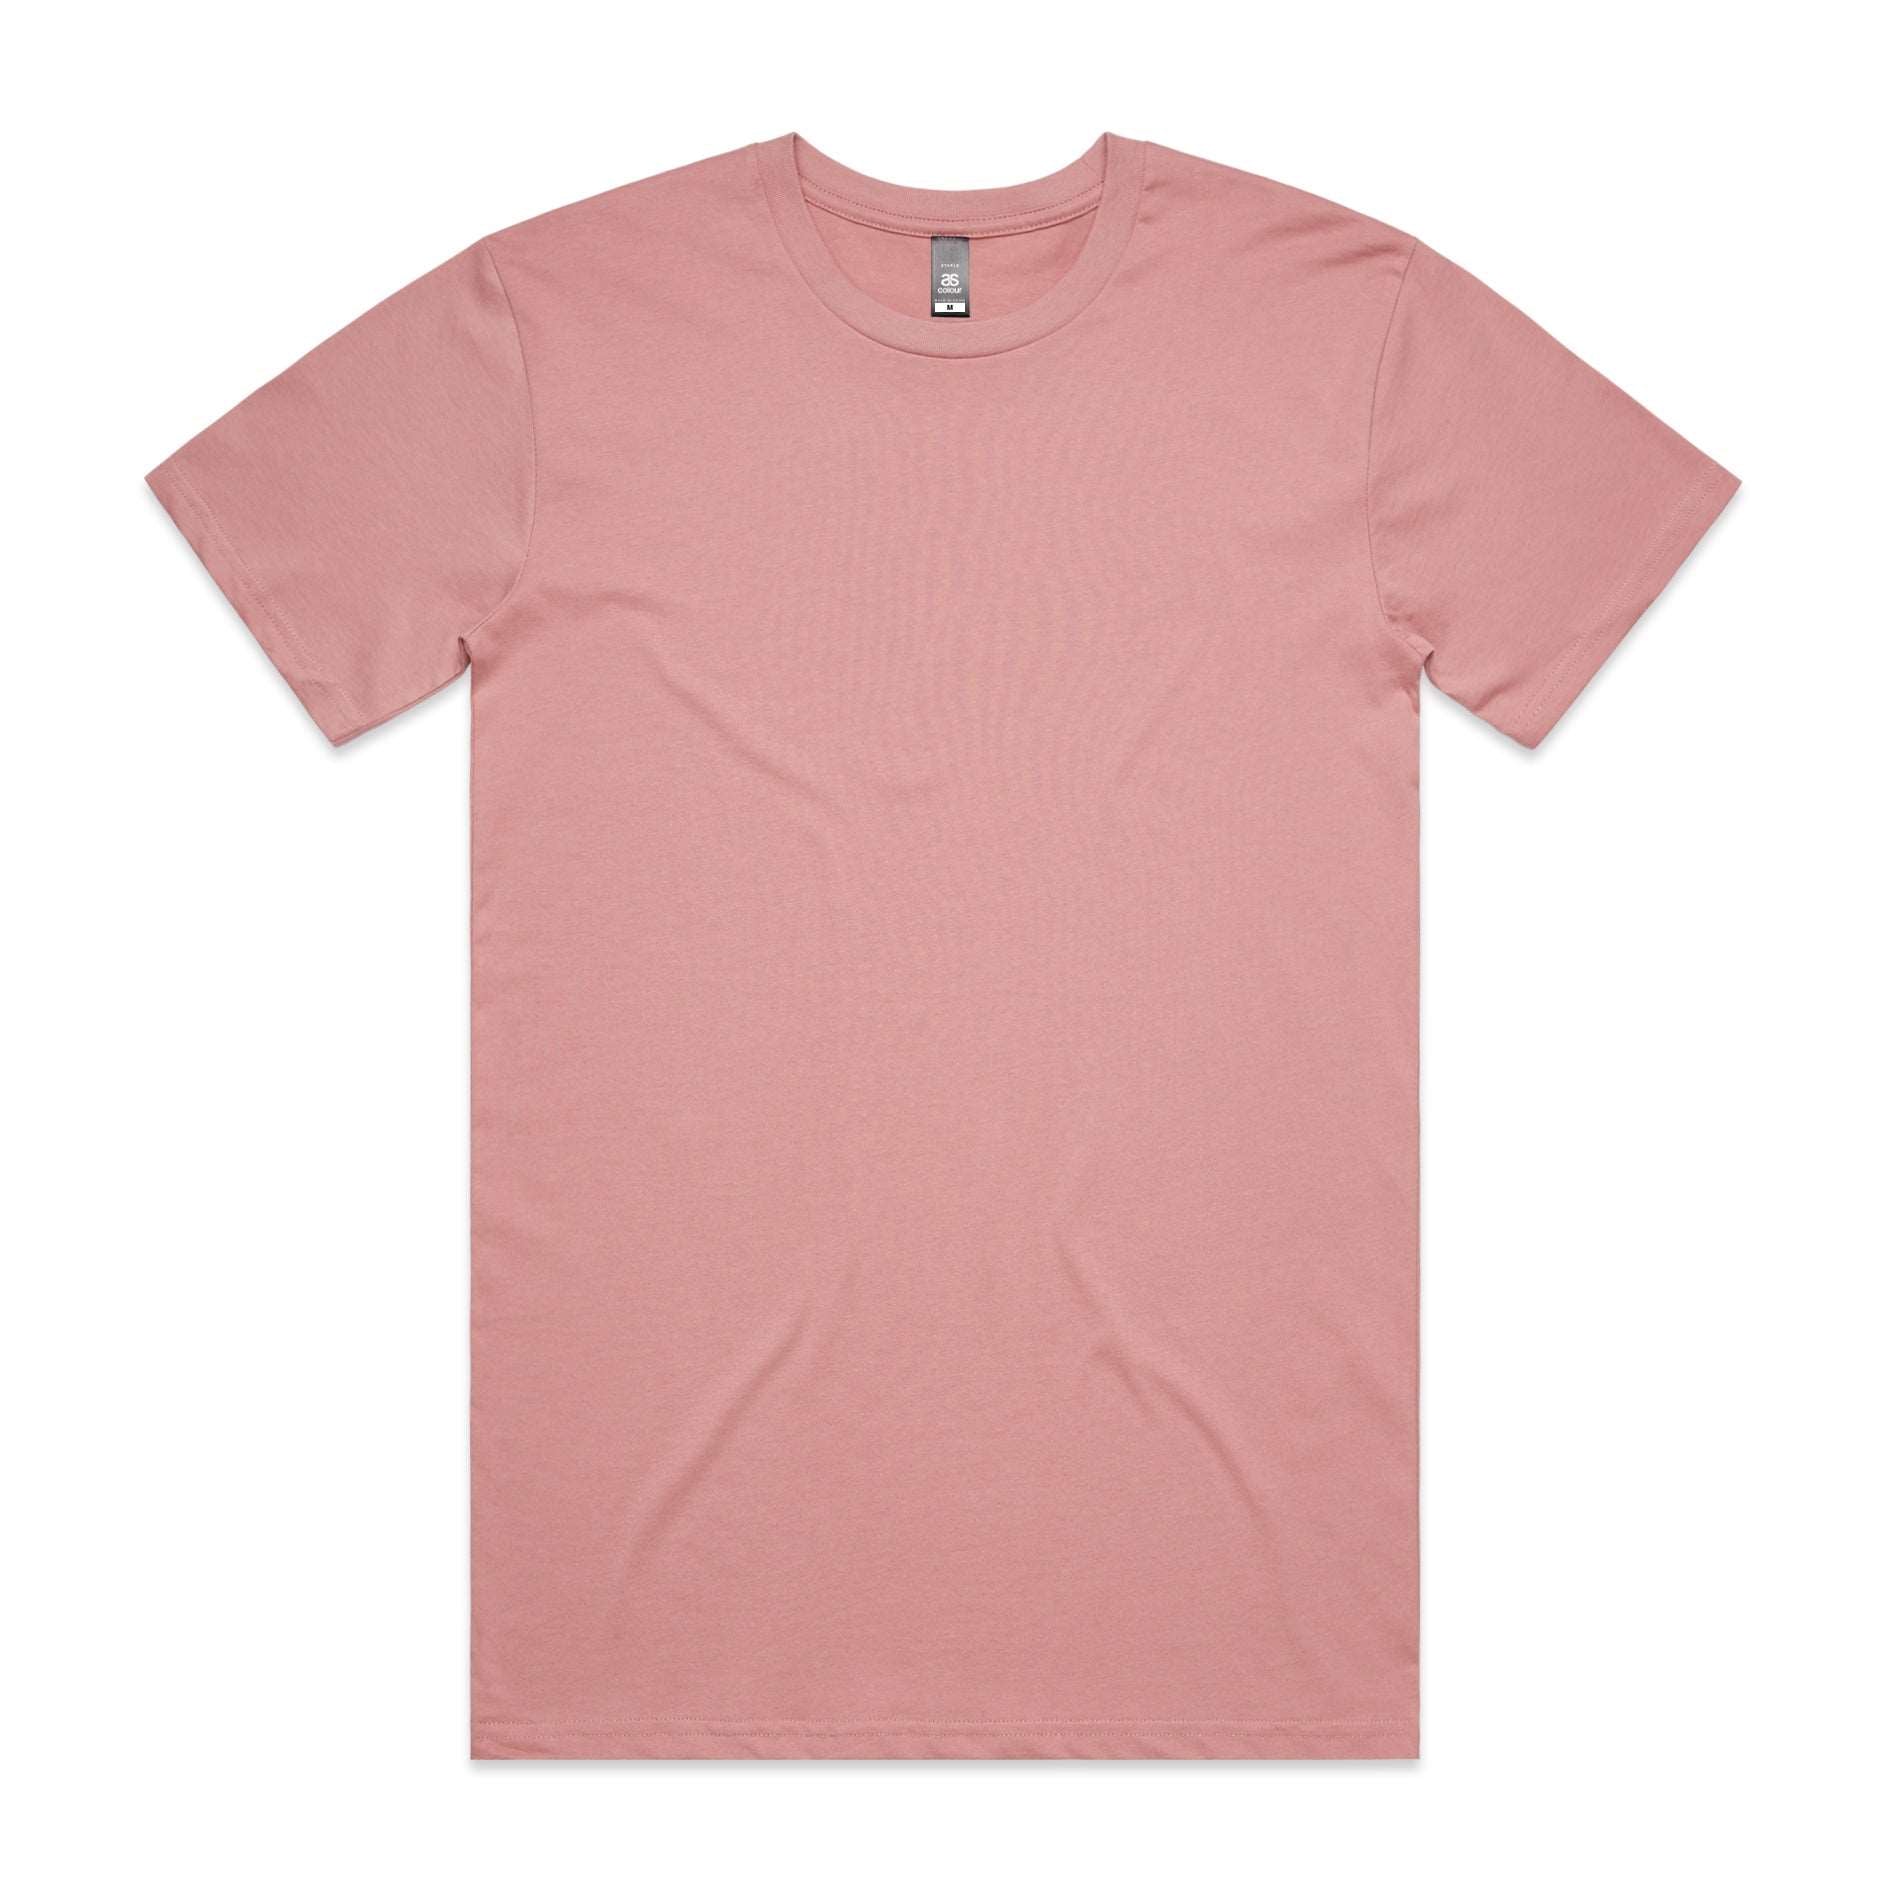 5001 - High Quality T shirts -  Spring and Fall Colors